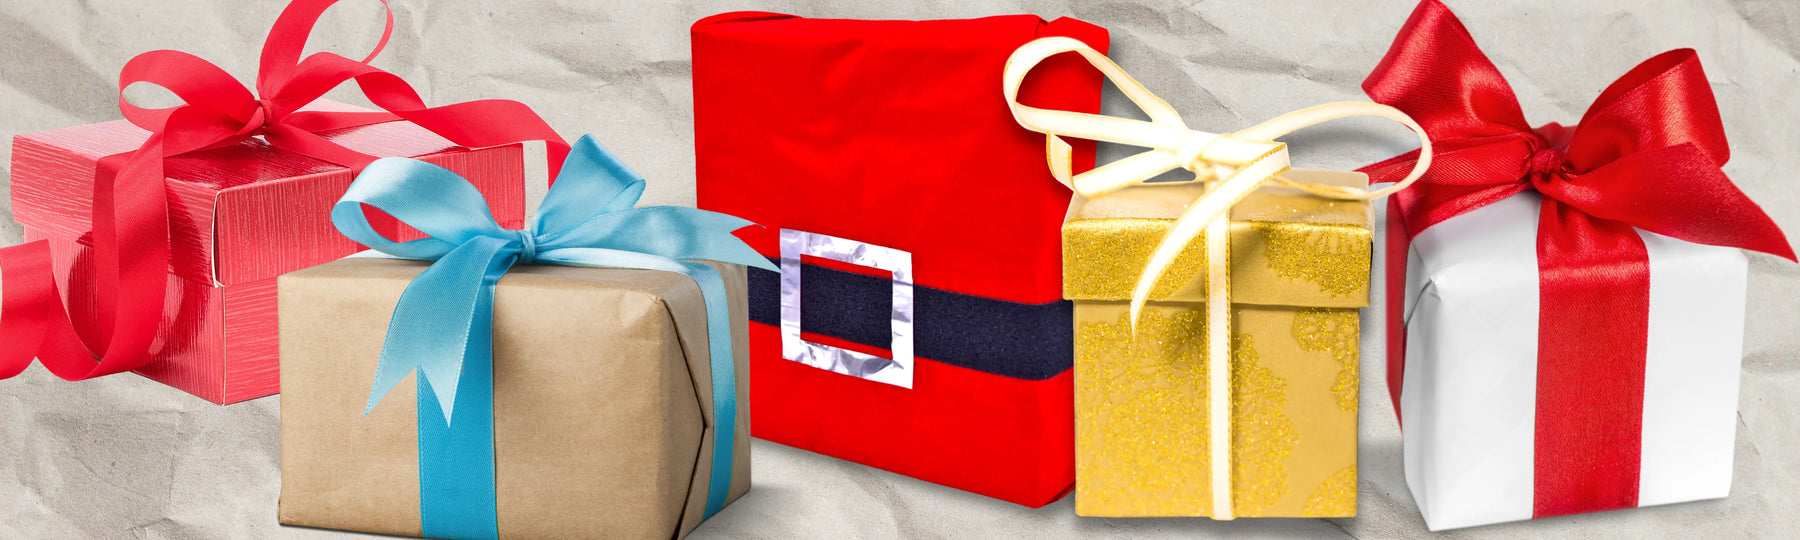 10 Ways to Make Your Holiday Gift Wrapping Stand Out